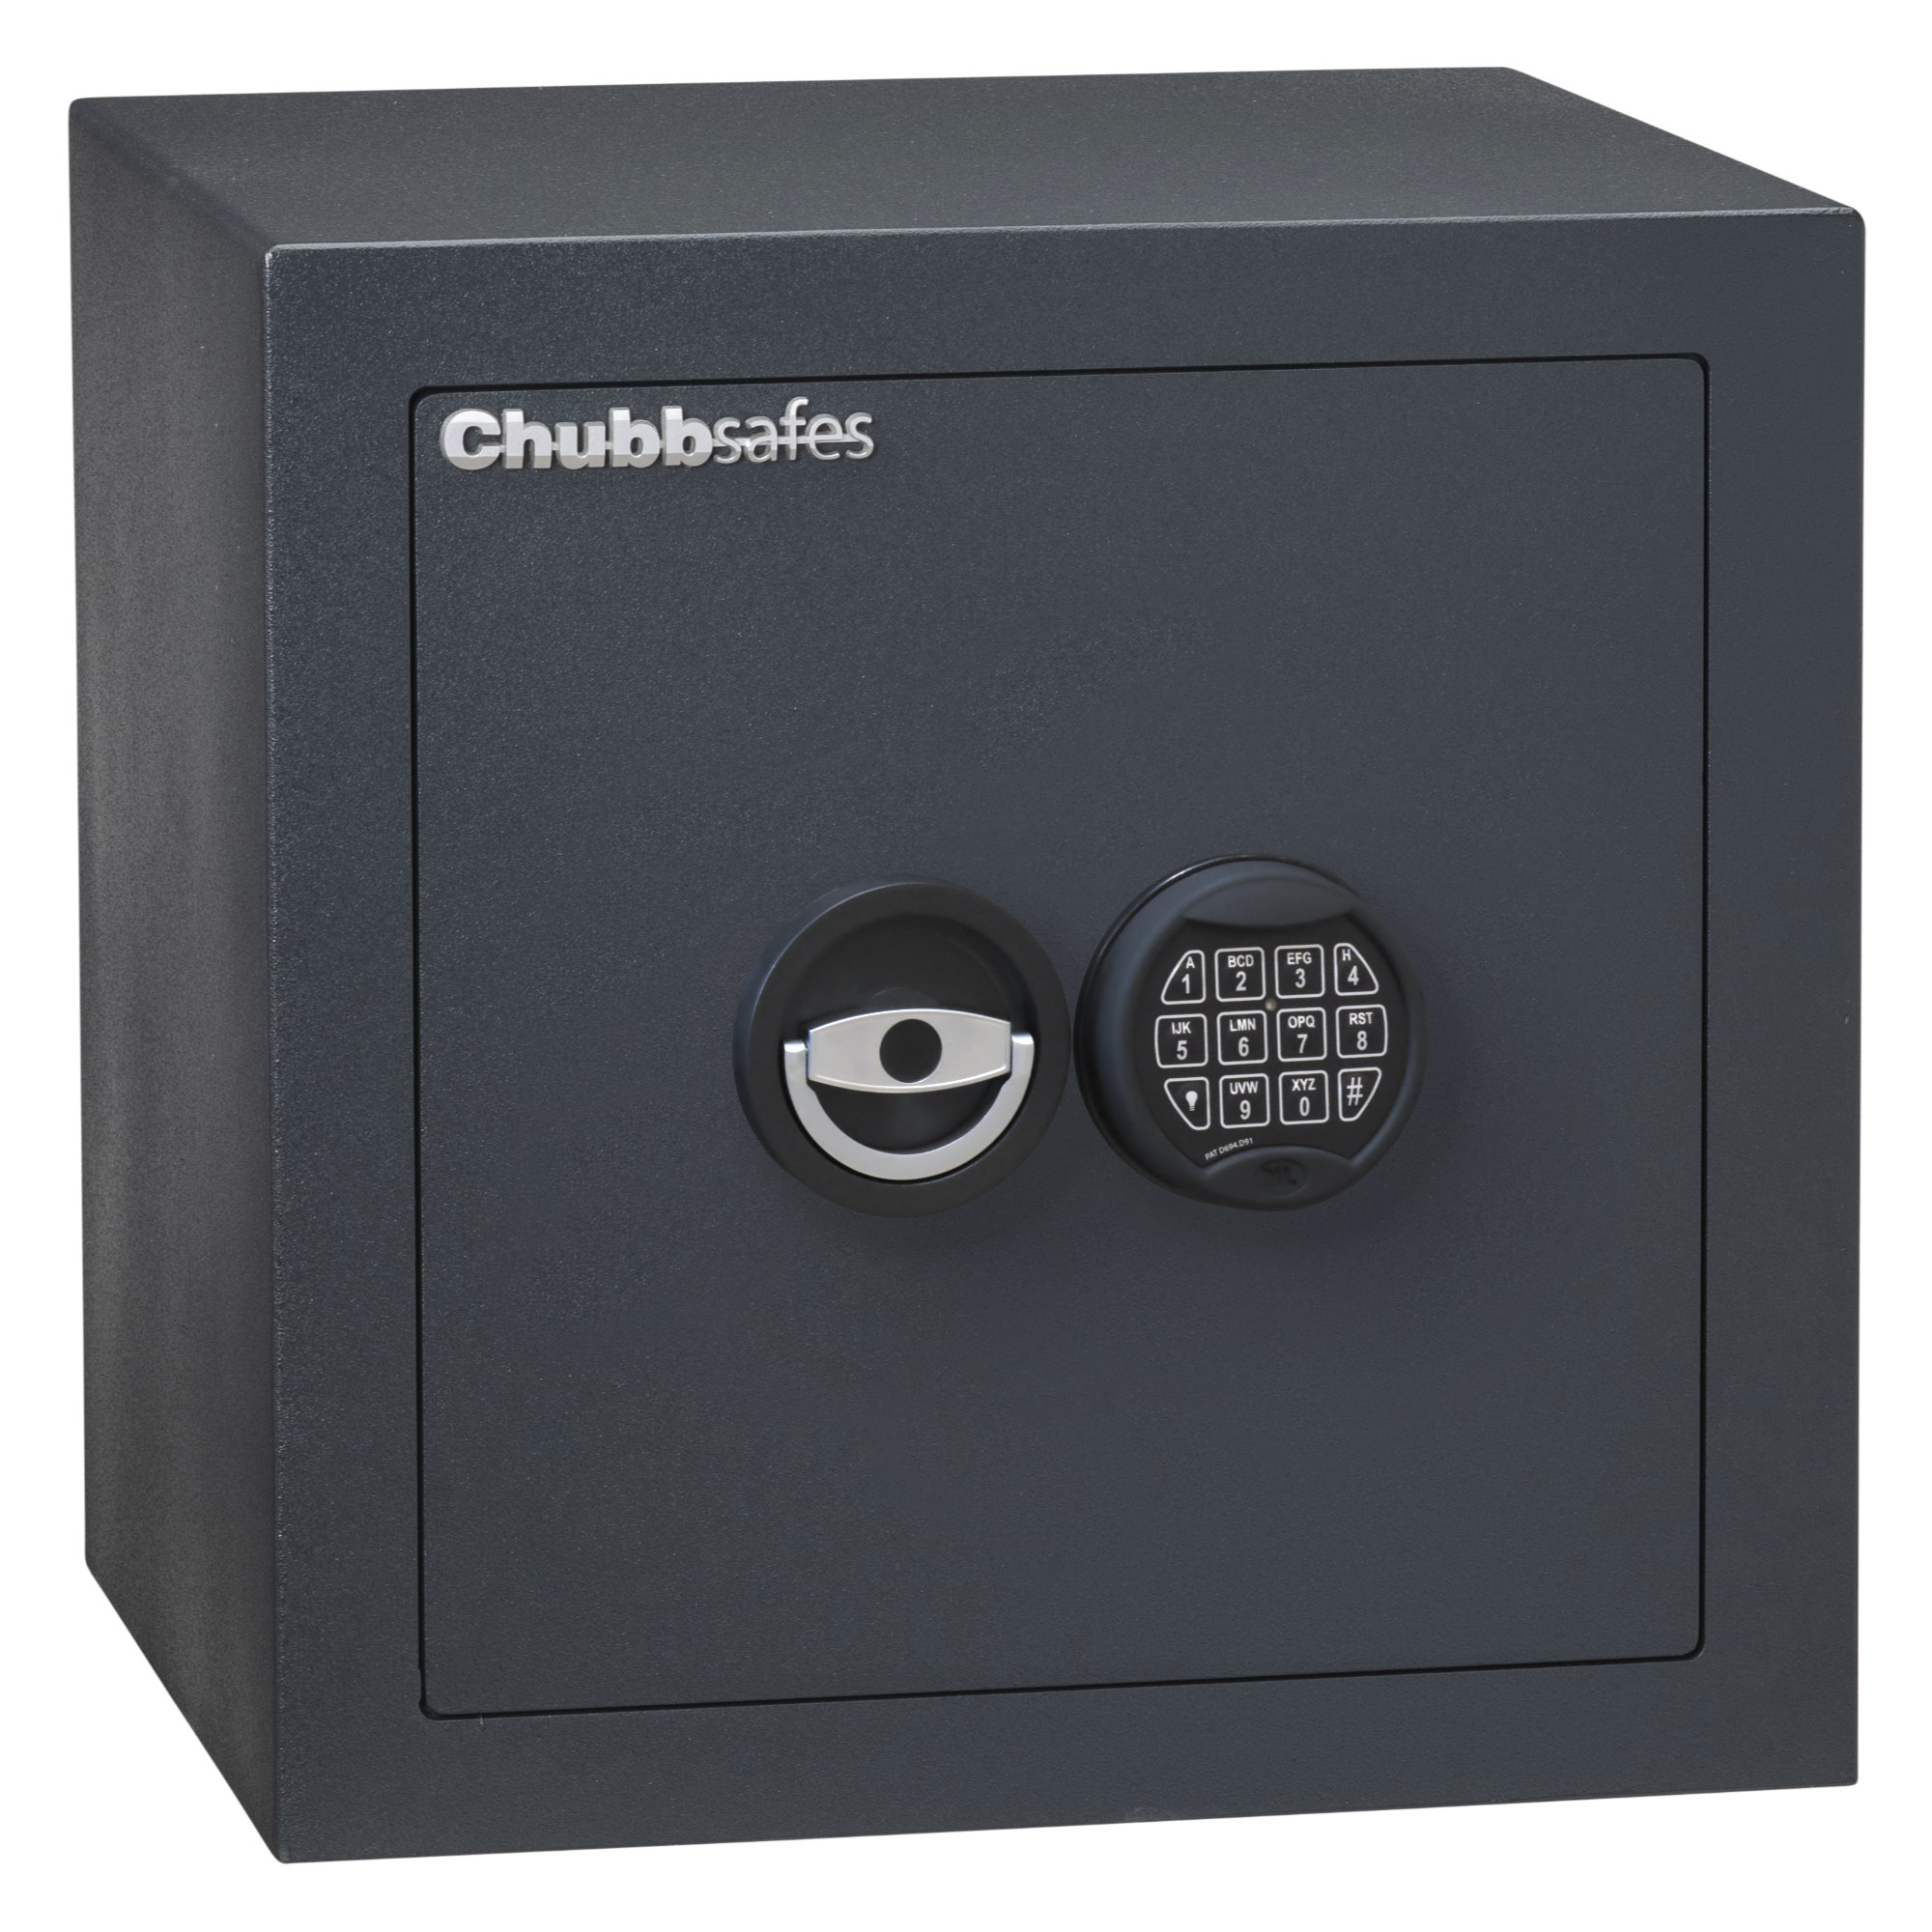 Chubbsafes Zeta grade 0 40e security safe for the home and office safe with high quality electronic lock.